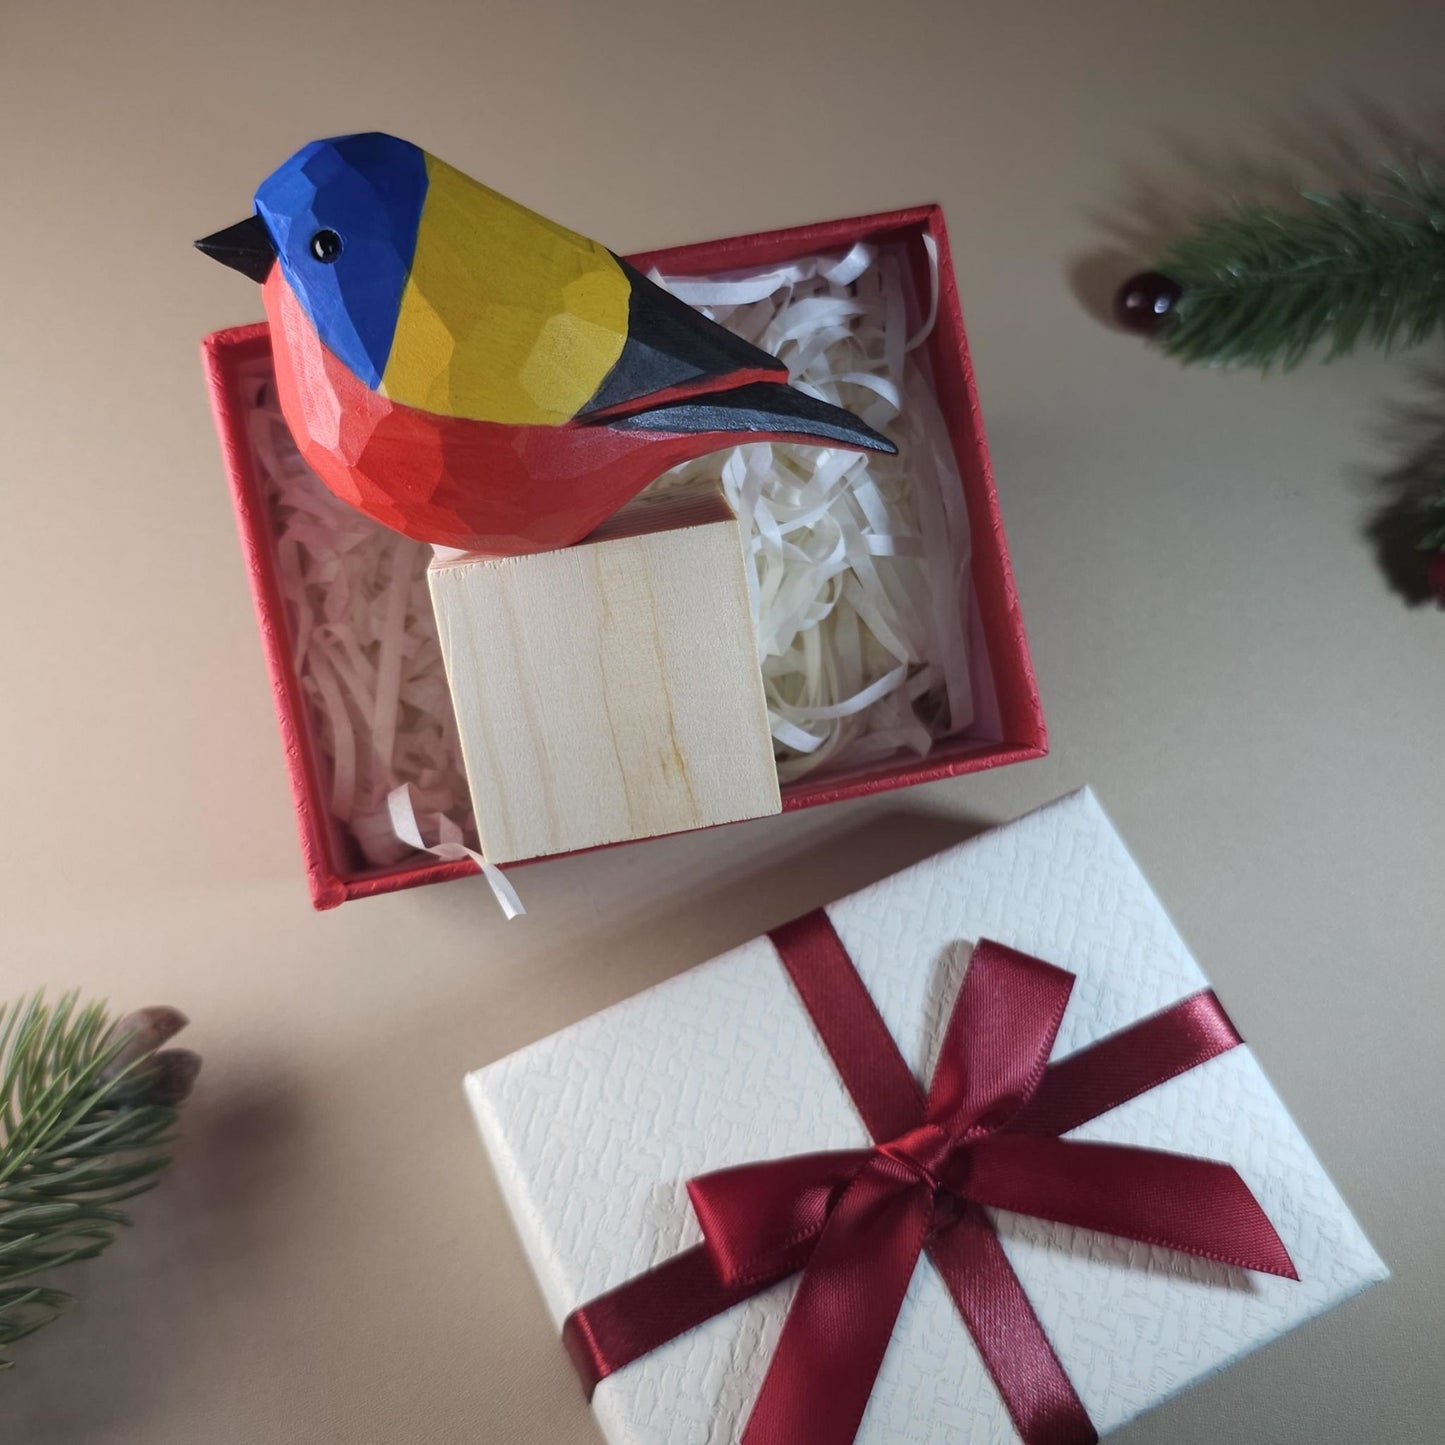 Bird Figurine comes with wooden stand and gift box packaging